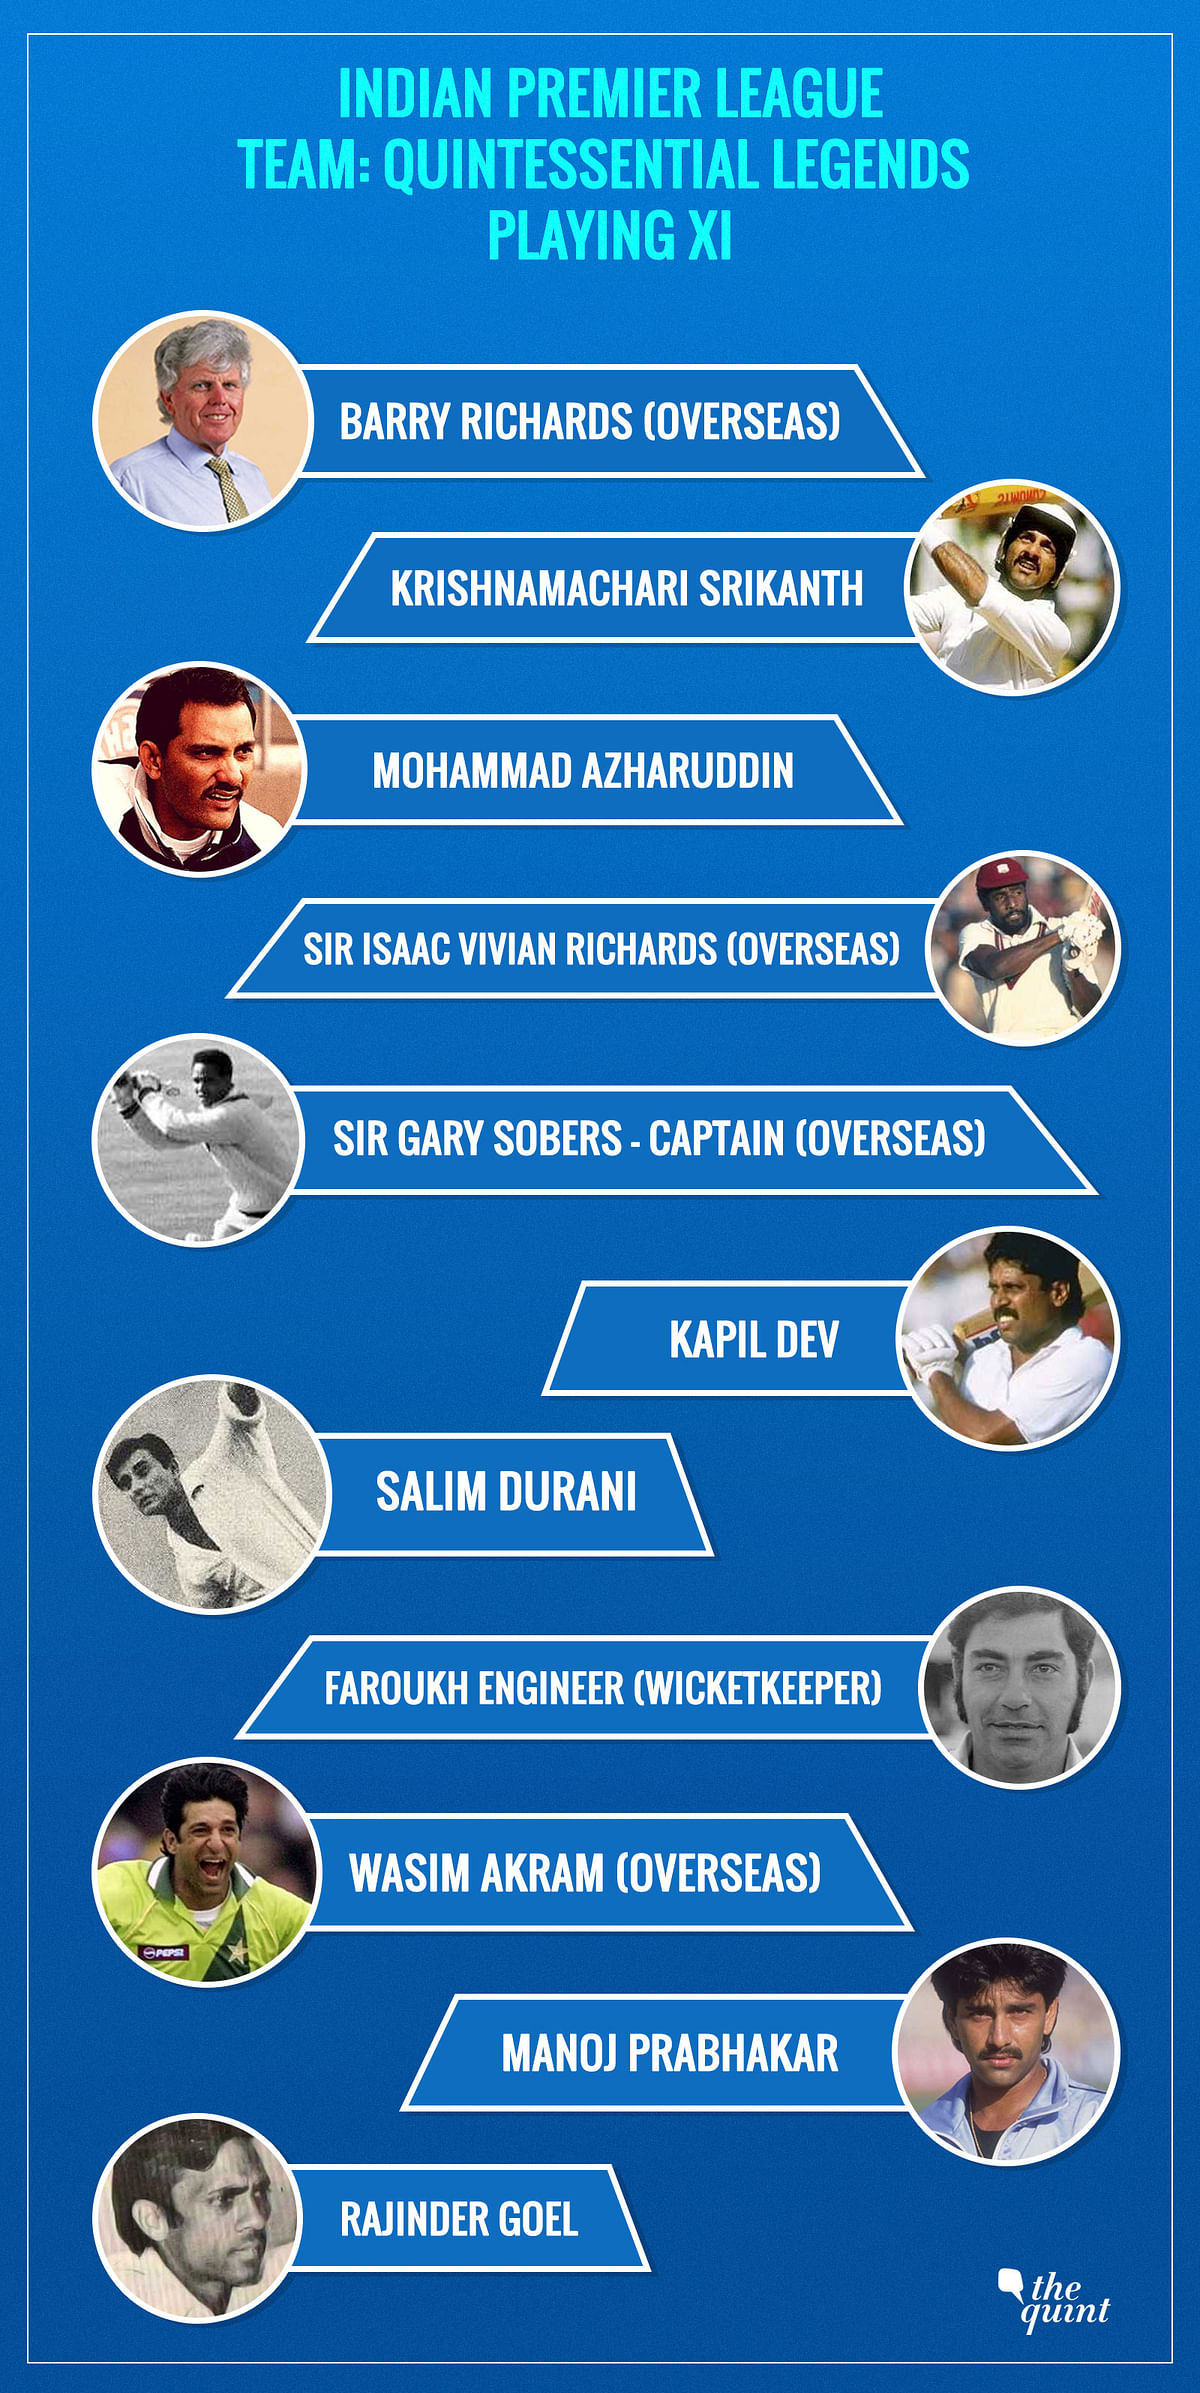 A team of players who’ve never played the IPL, but would have lit up the league with their talent and versatility.